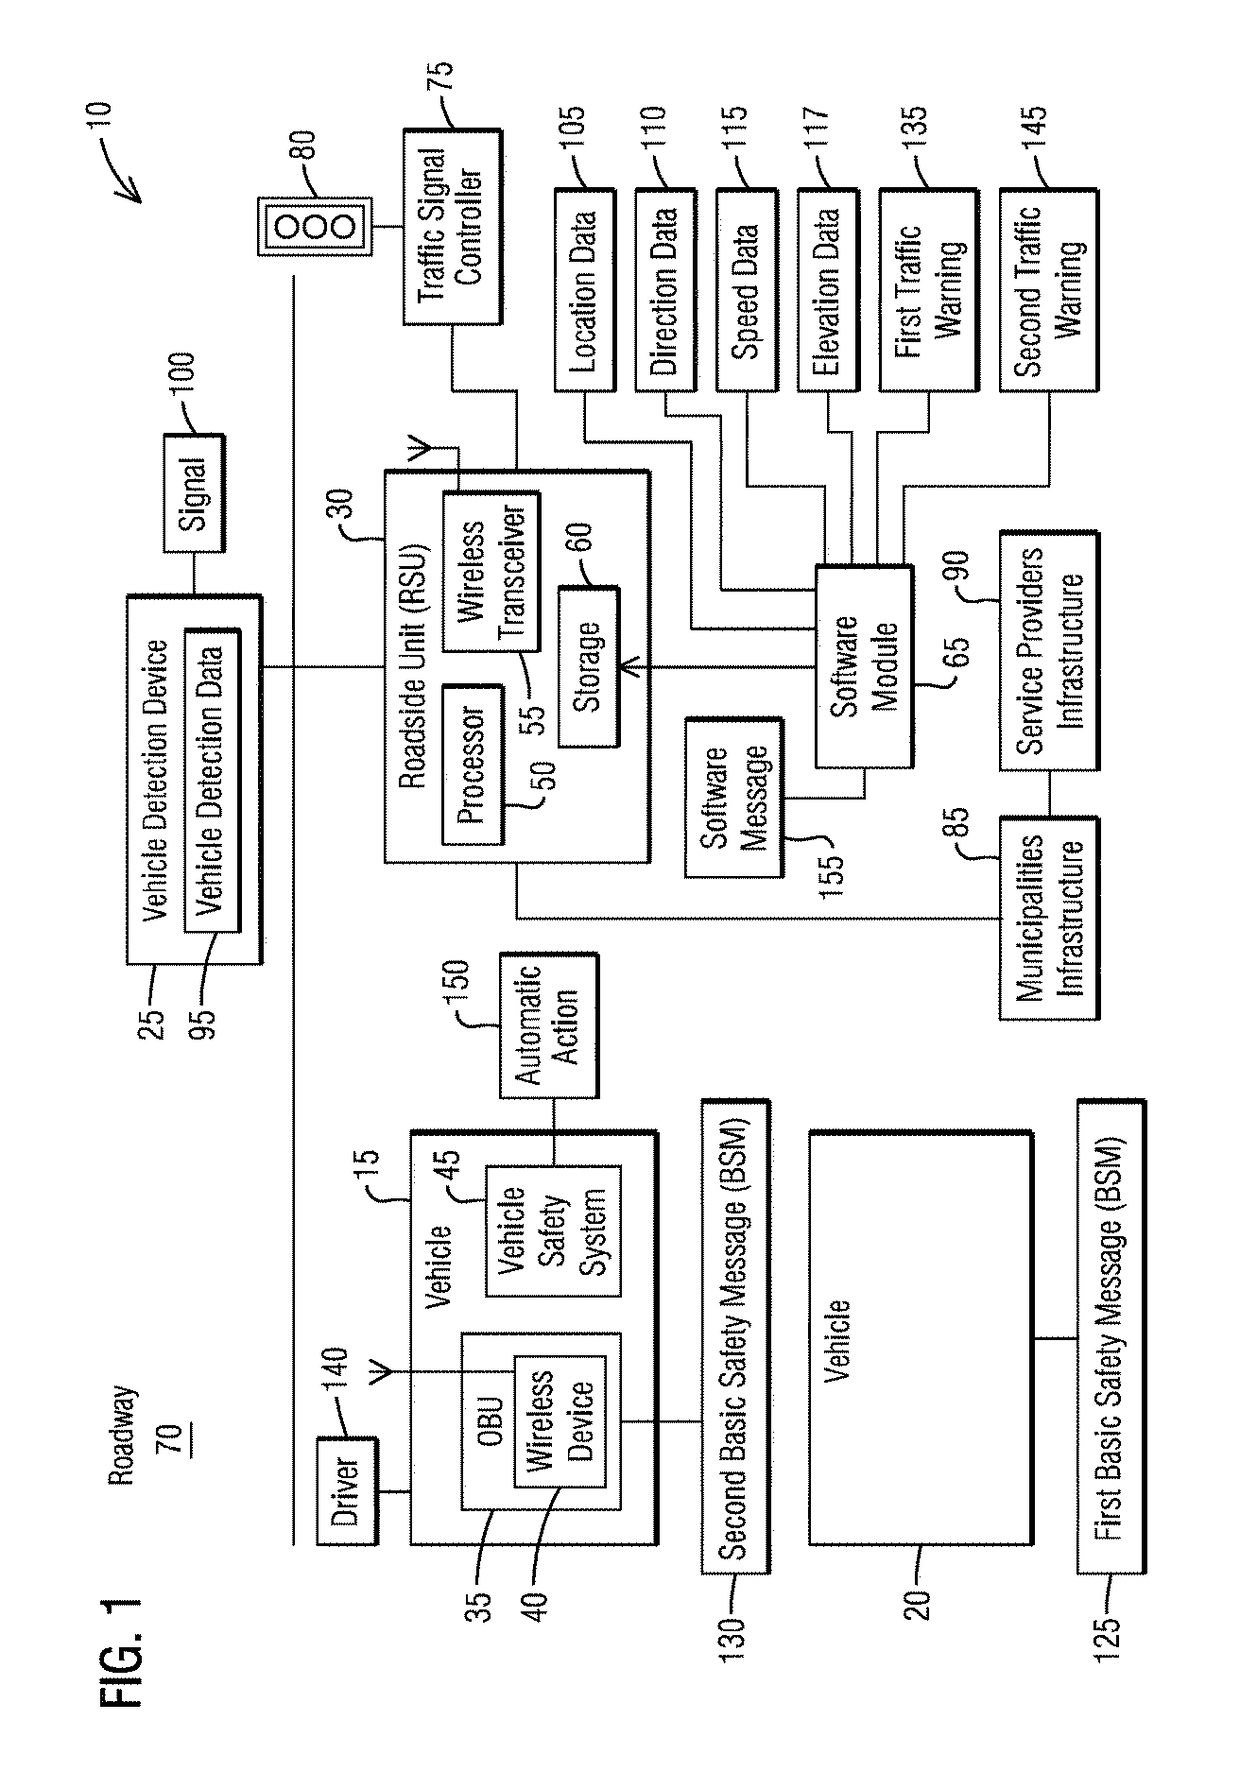 Systems and methods of creating and blending proxy data for mobile objects having no transmitting devices